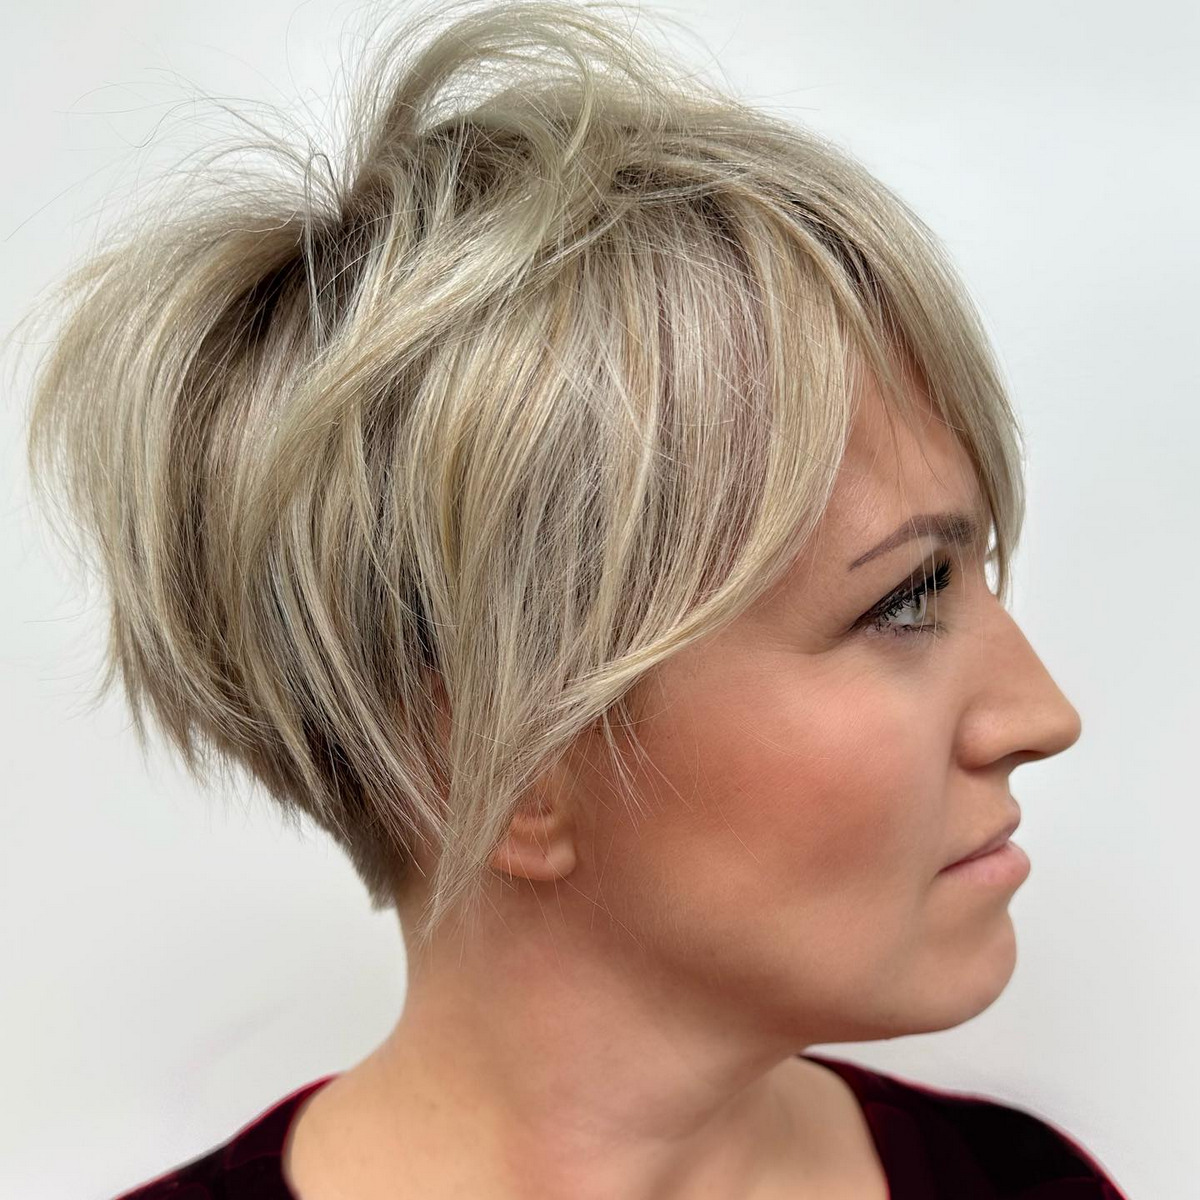 Edgy Pixie With Bangs and Highlights